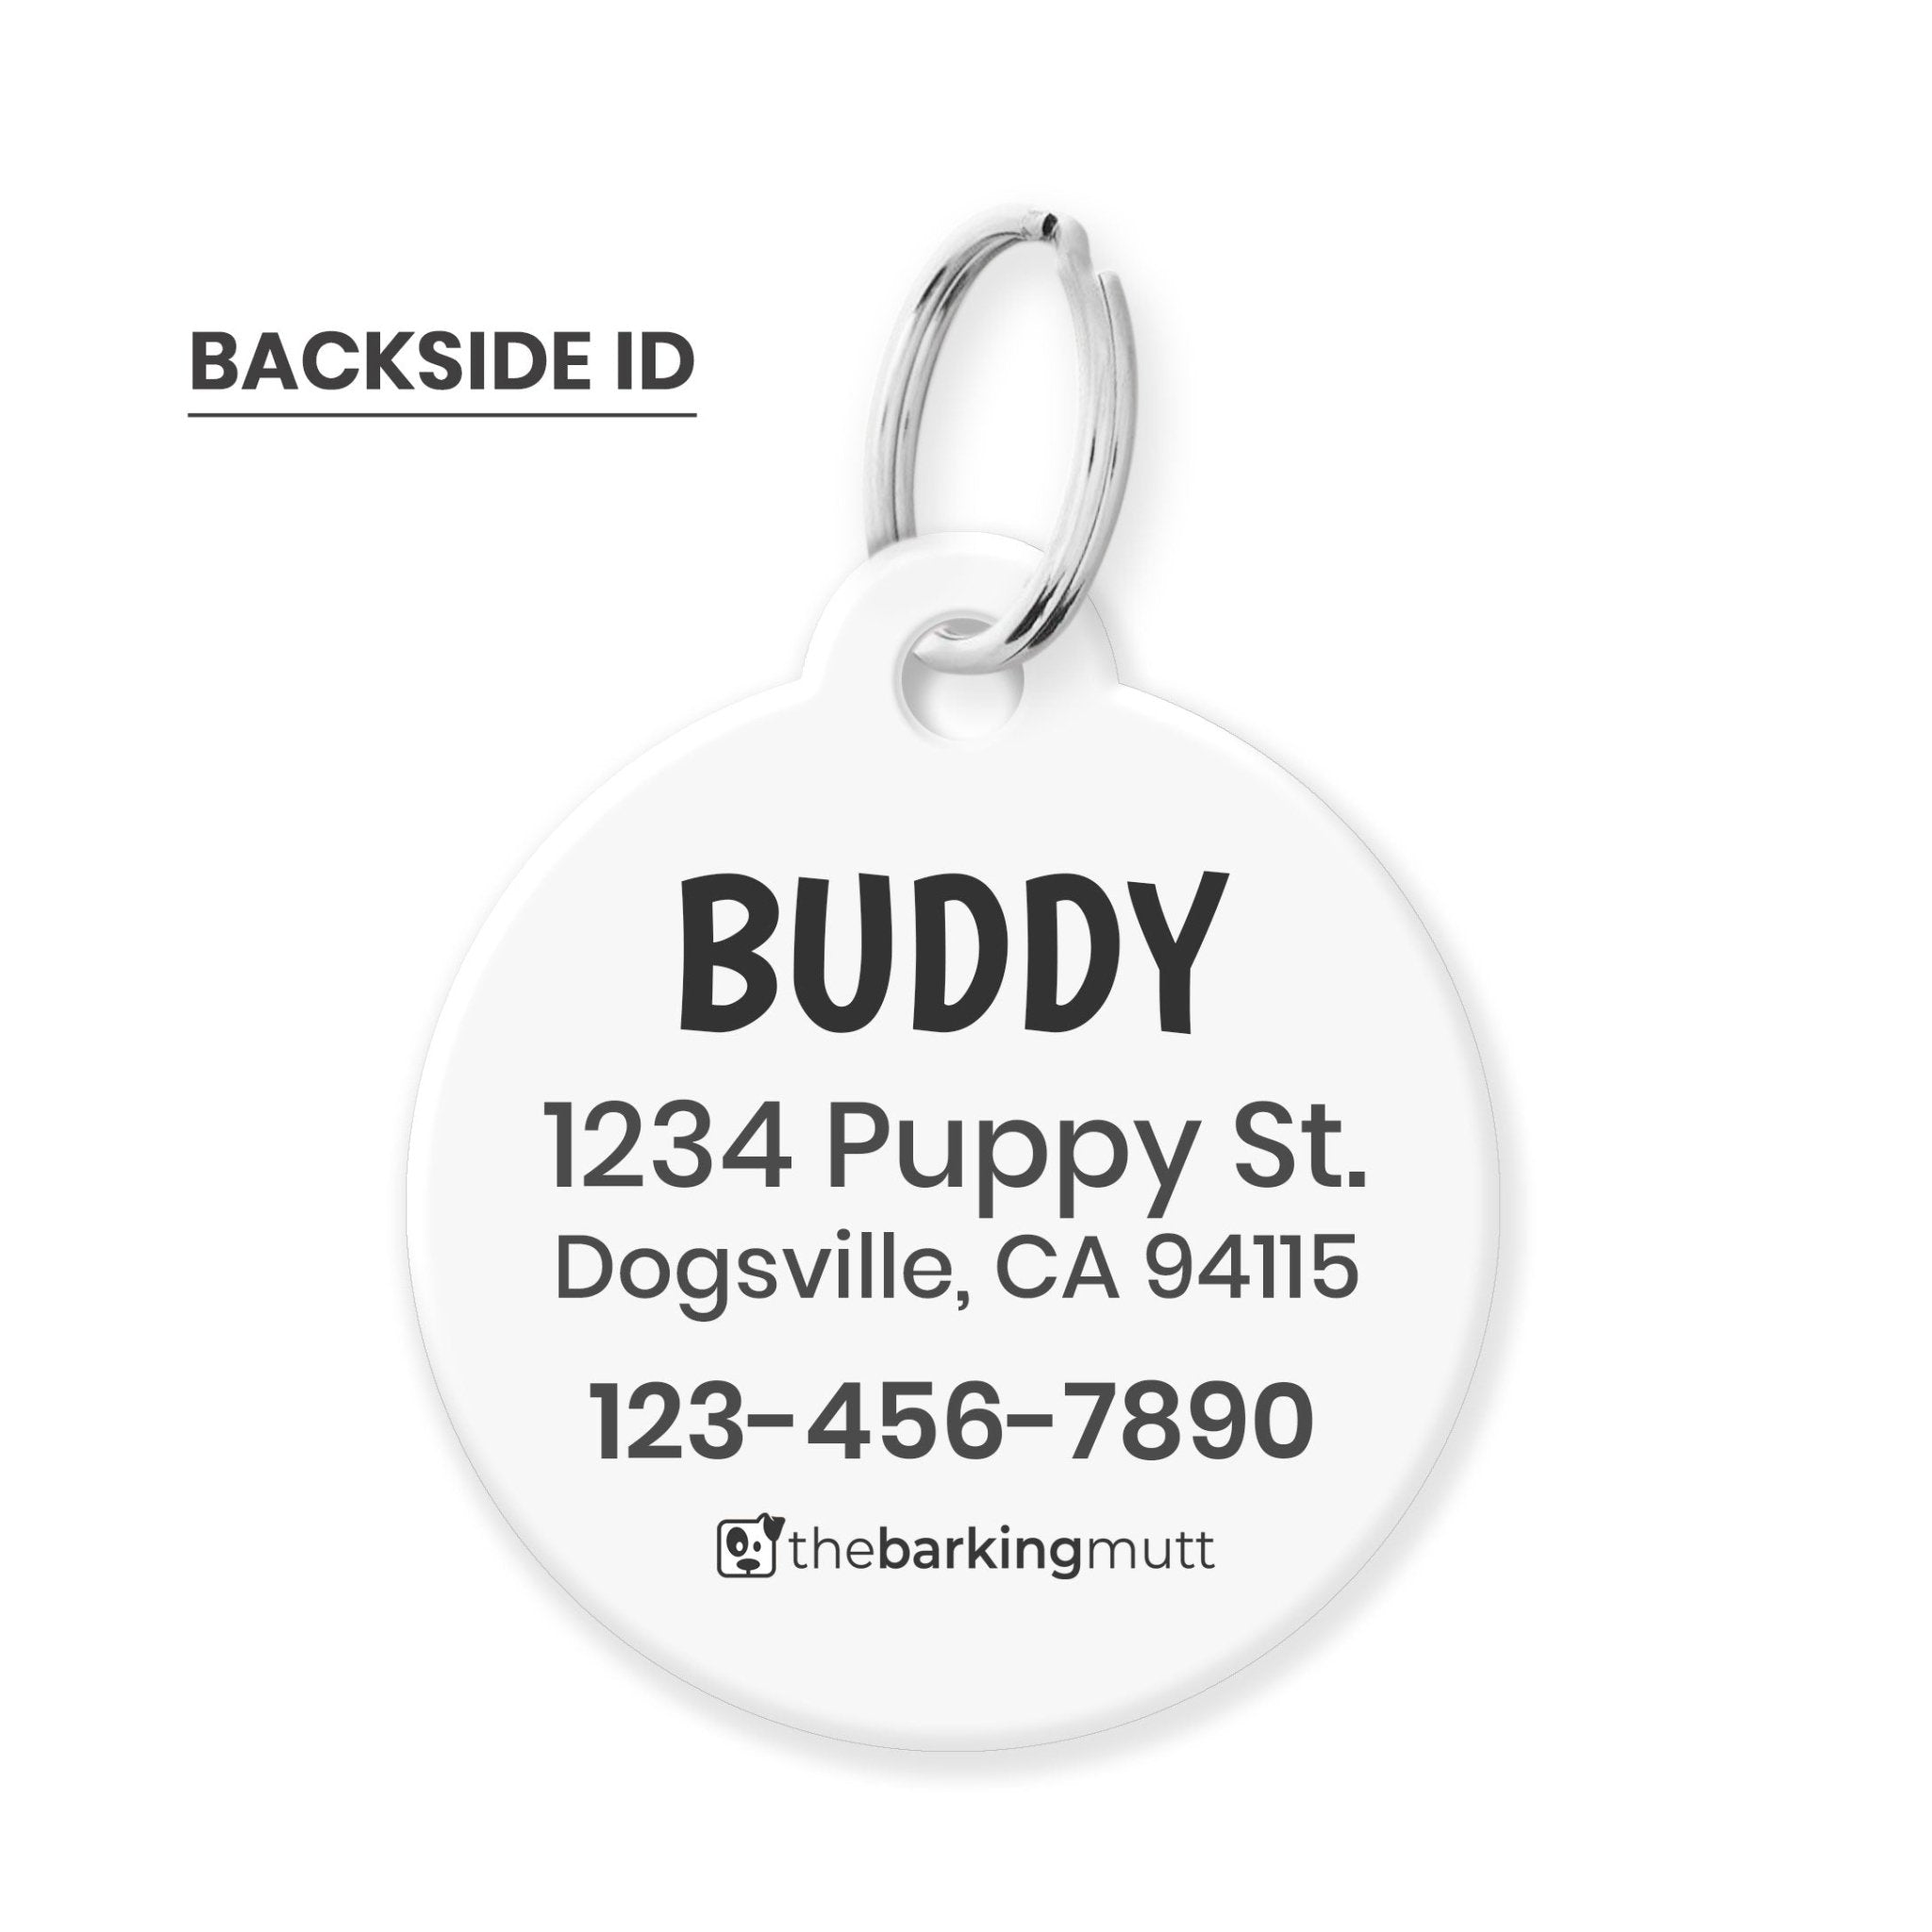 Spoiled Pooch Funny Pet Tag - The Barking Mutt